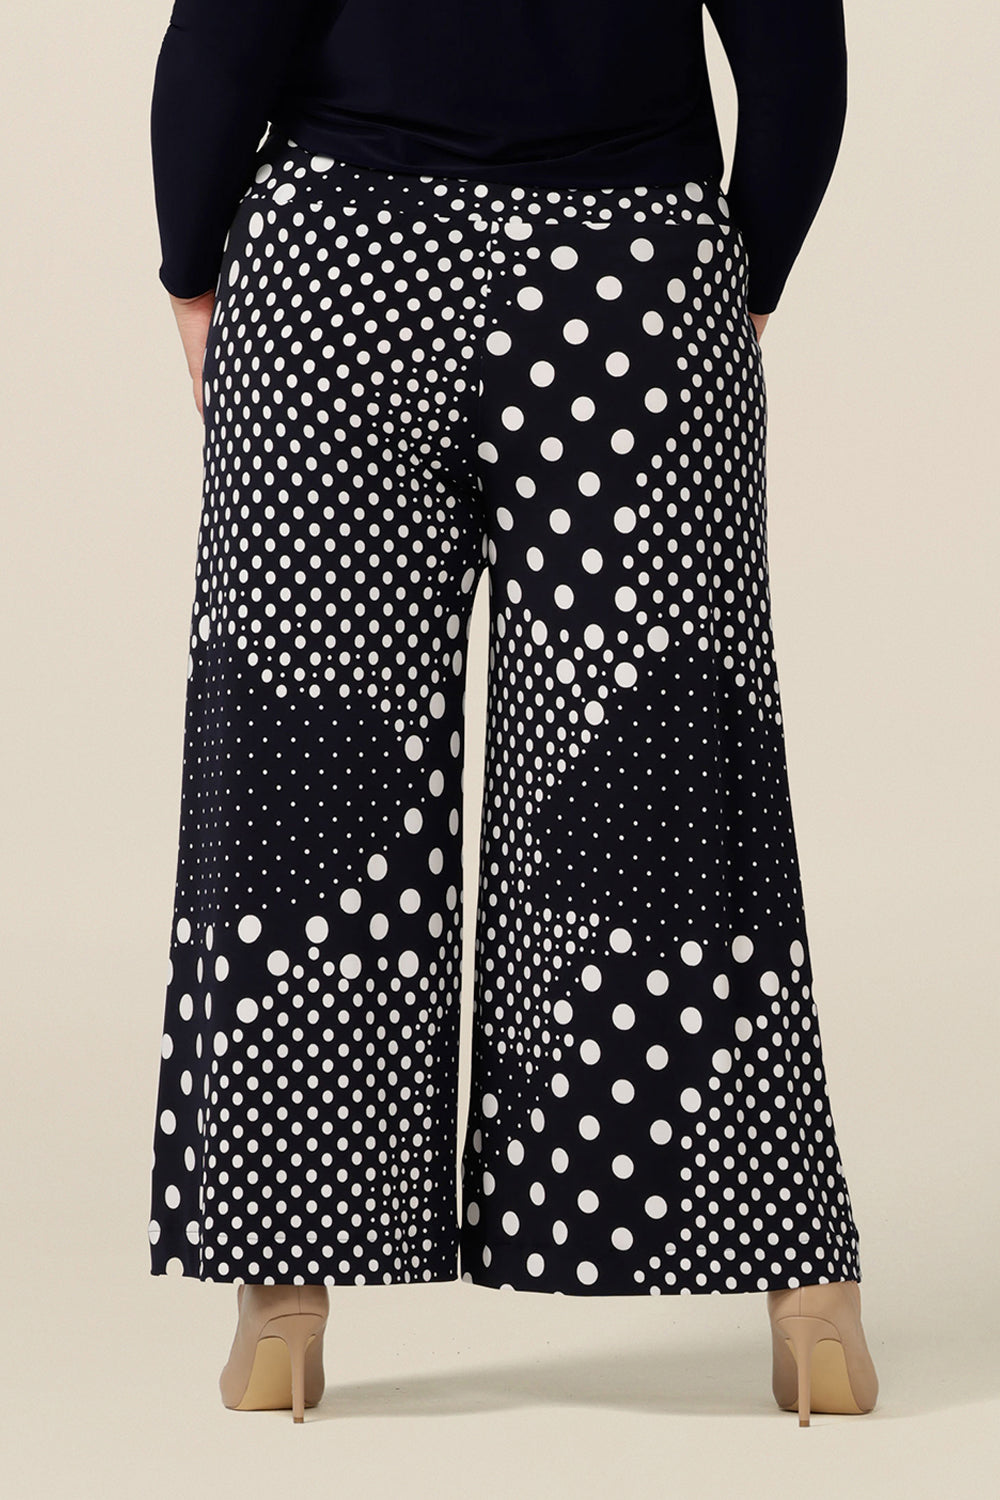 Back view of work and corporate wear pants by Australia and New Zealand fashion label, L&F's wide leg pants in a navy and white spot print. Shop these made-in-australia , stretch jersey trousers online in sizes 8 to 24.